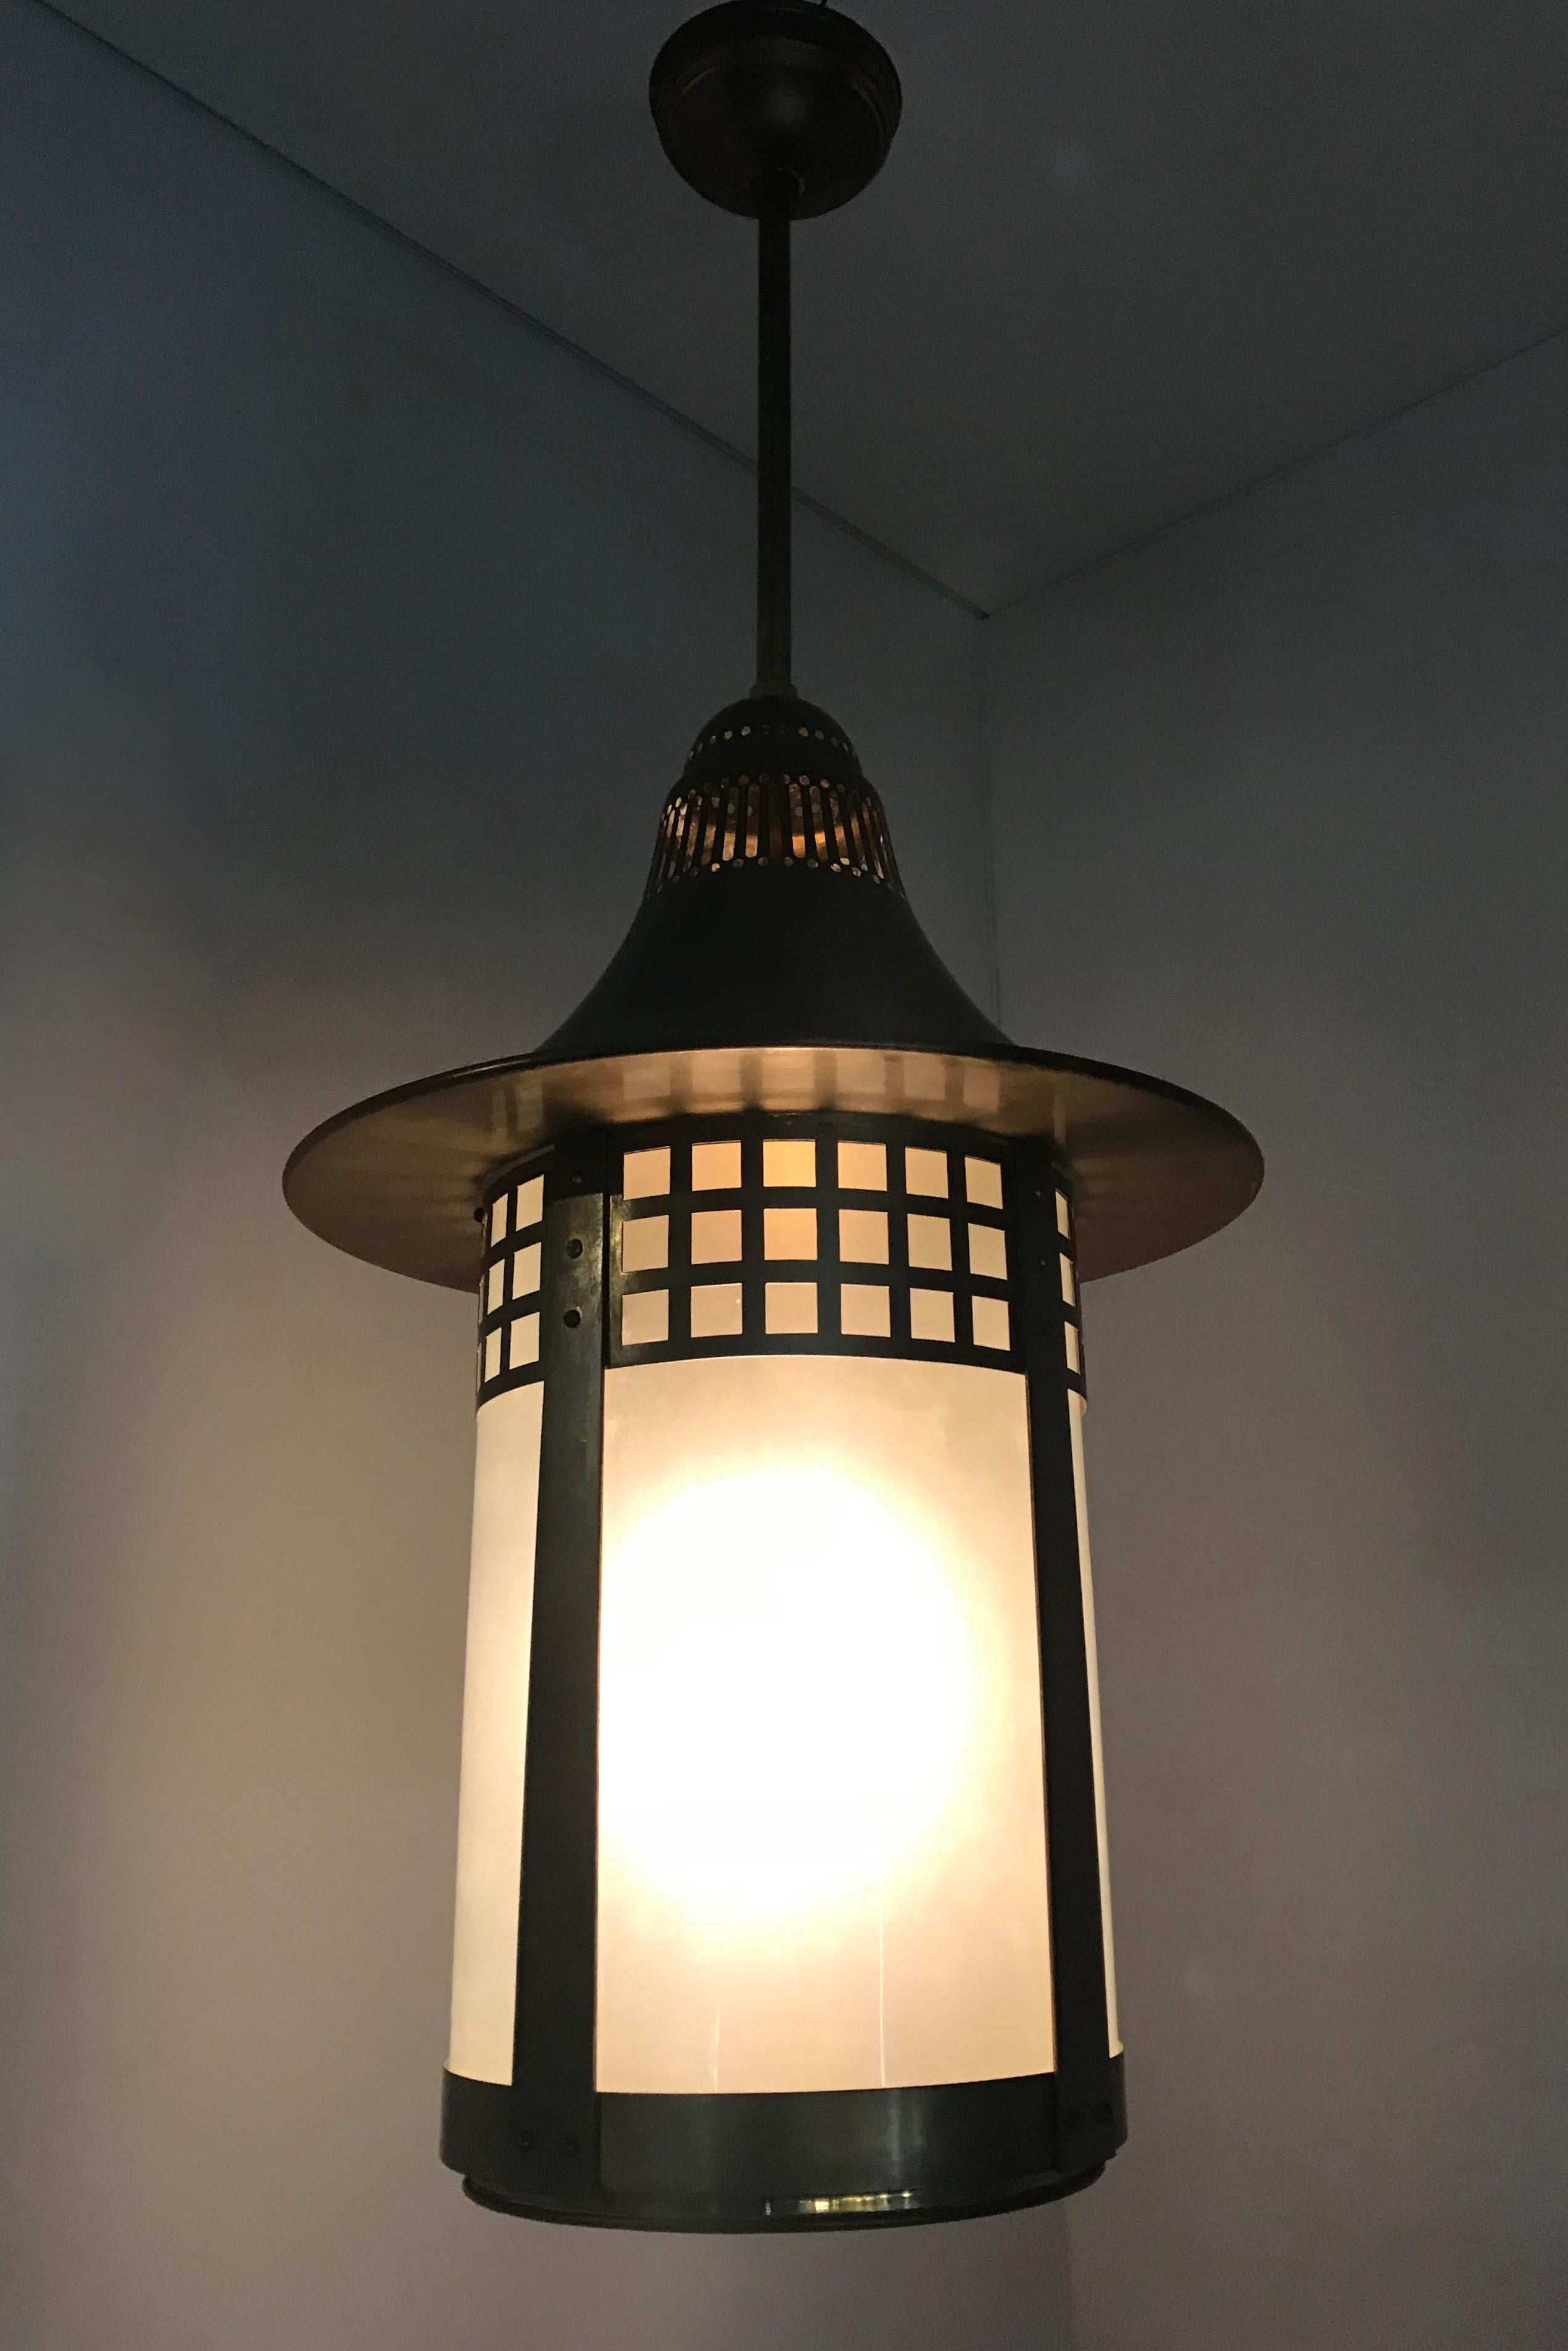 Top quality made, extra large and therefor too extremely rare antique light fixture.

With early 20th century light fixtures as one of our specialities, one would think that after 25 years of selling antique lights we would have seen it all by now.